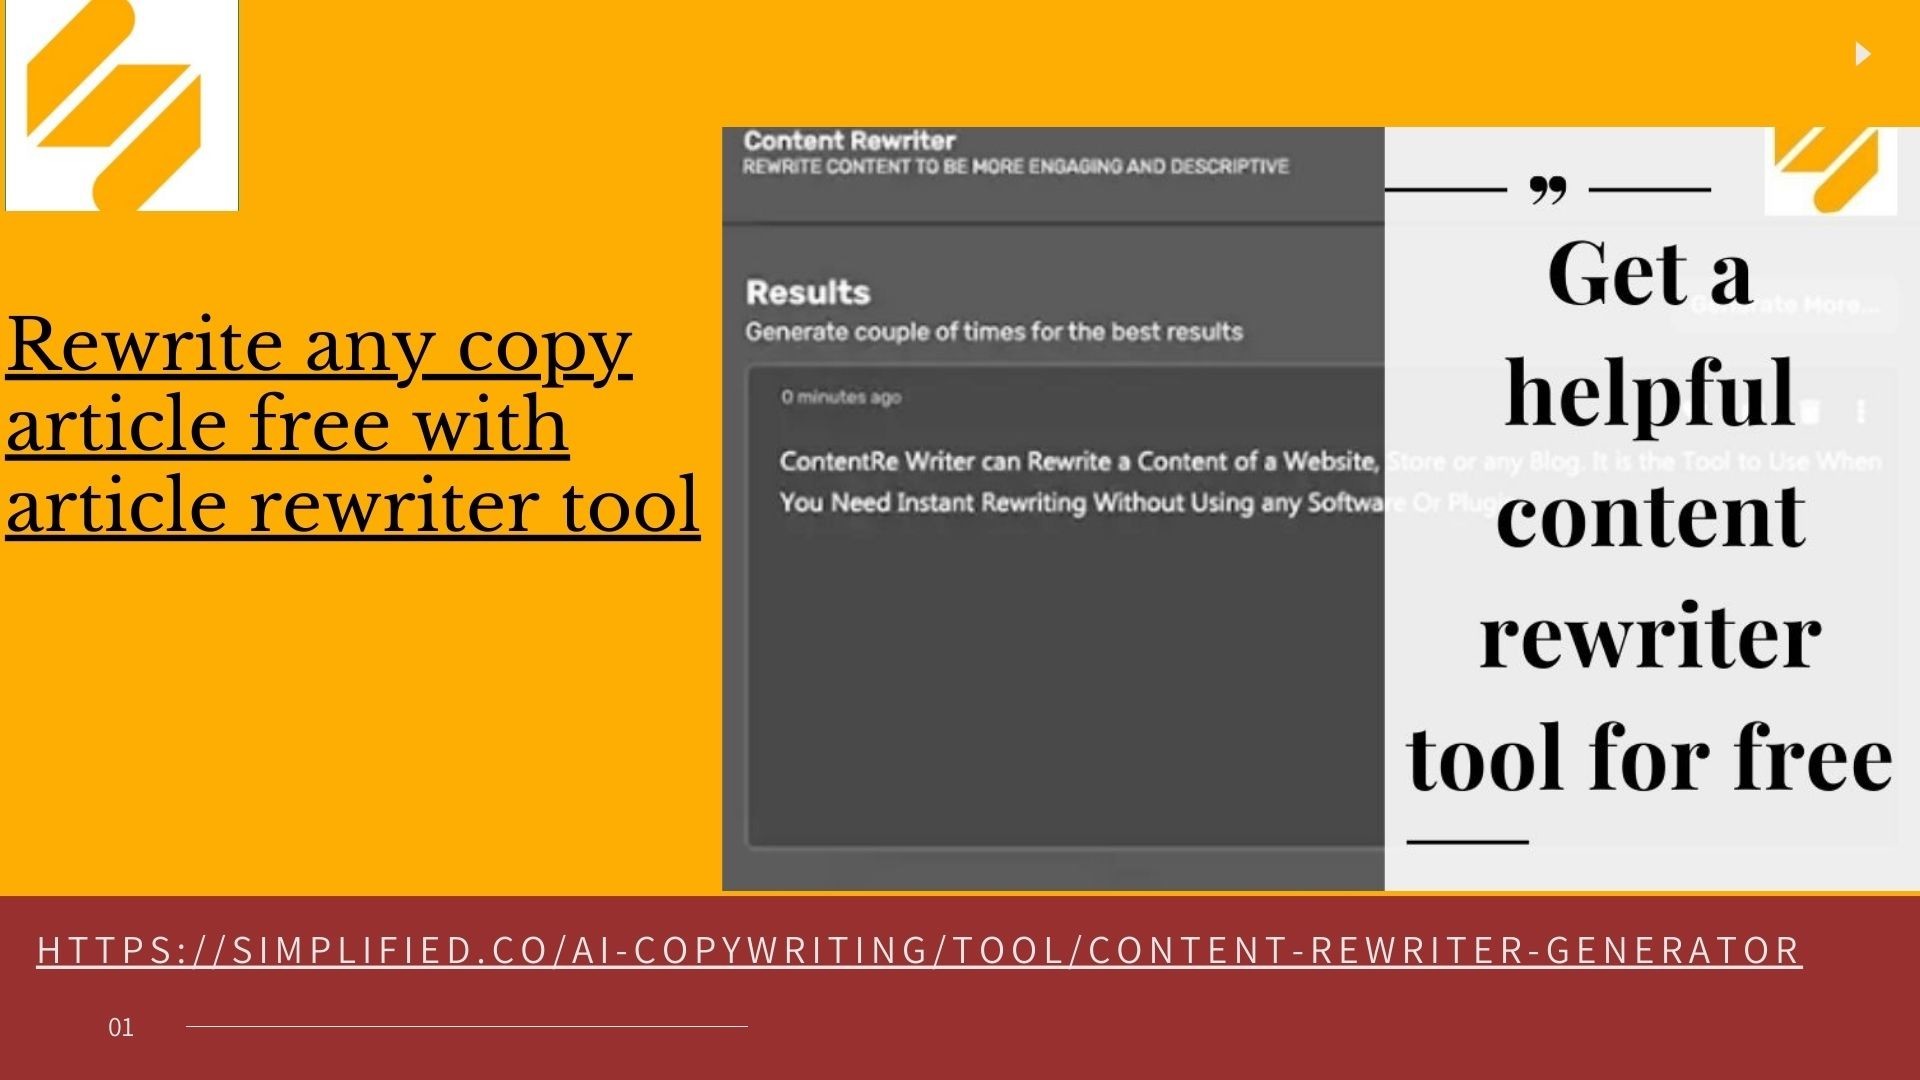 Rewrite any copy article free with article rewriter tool